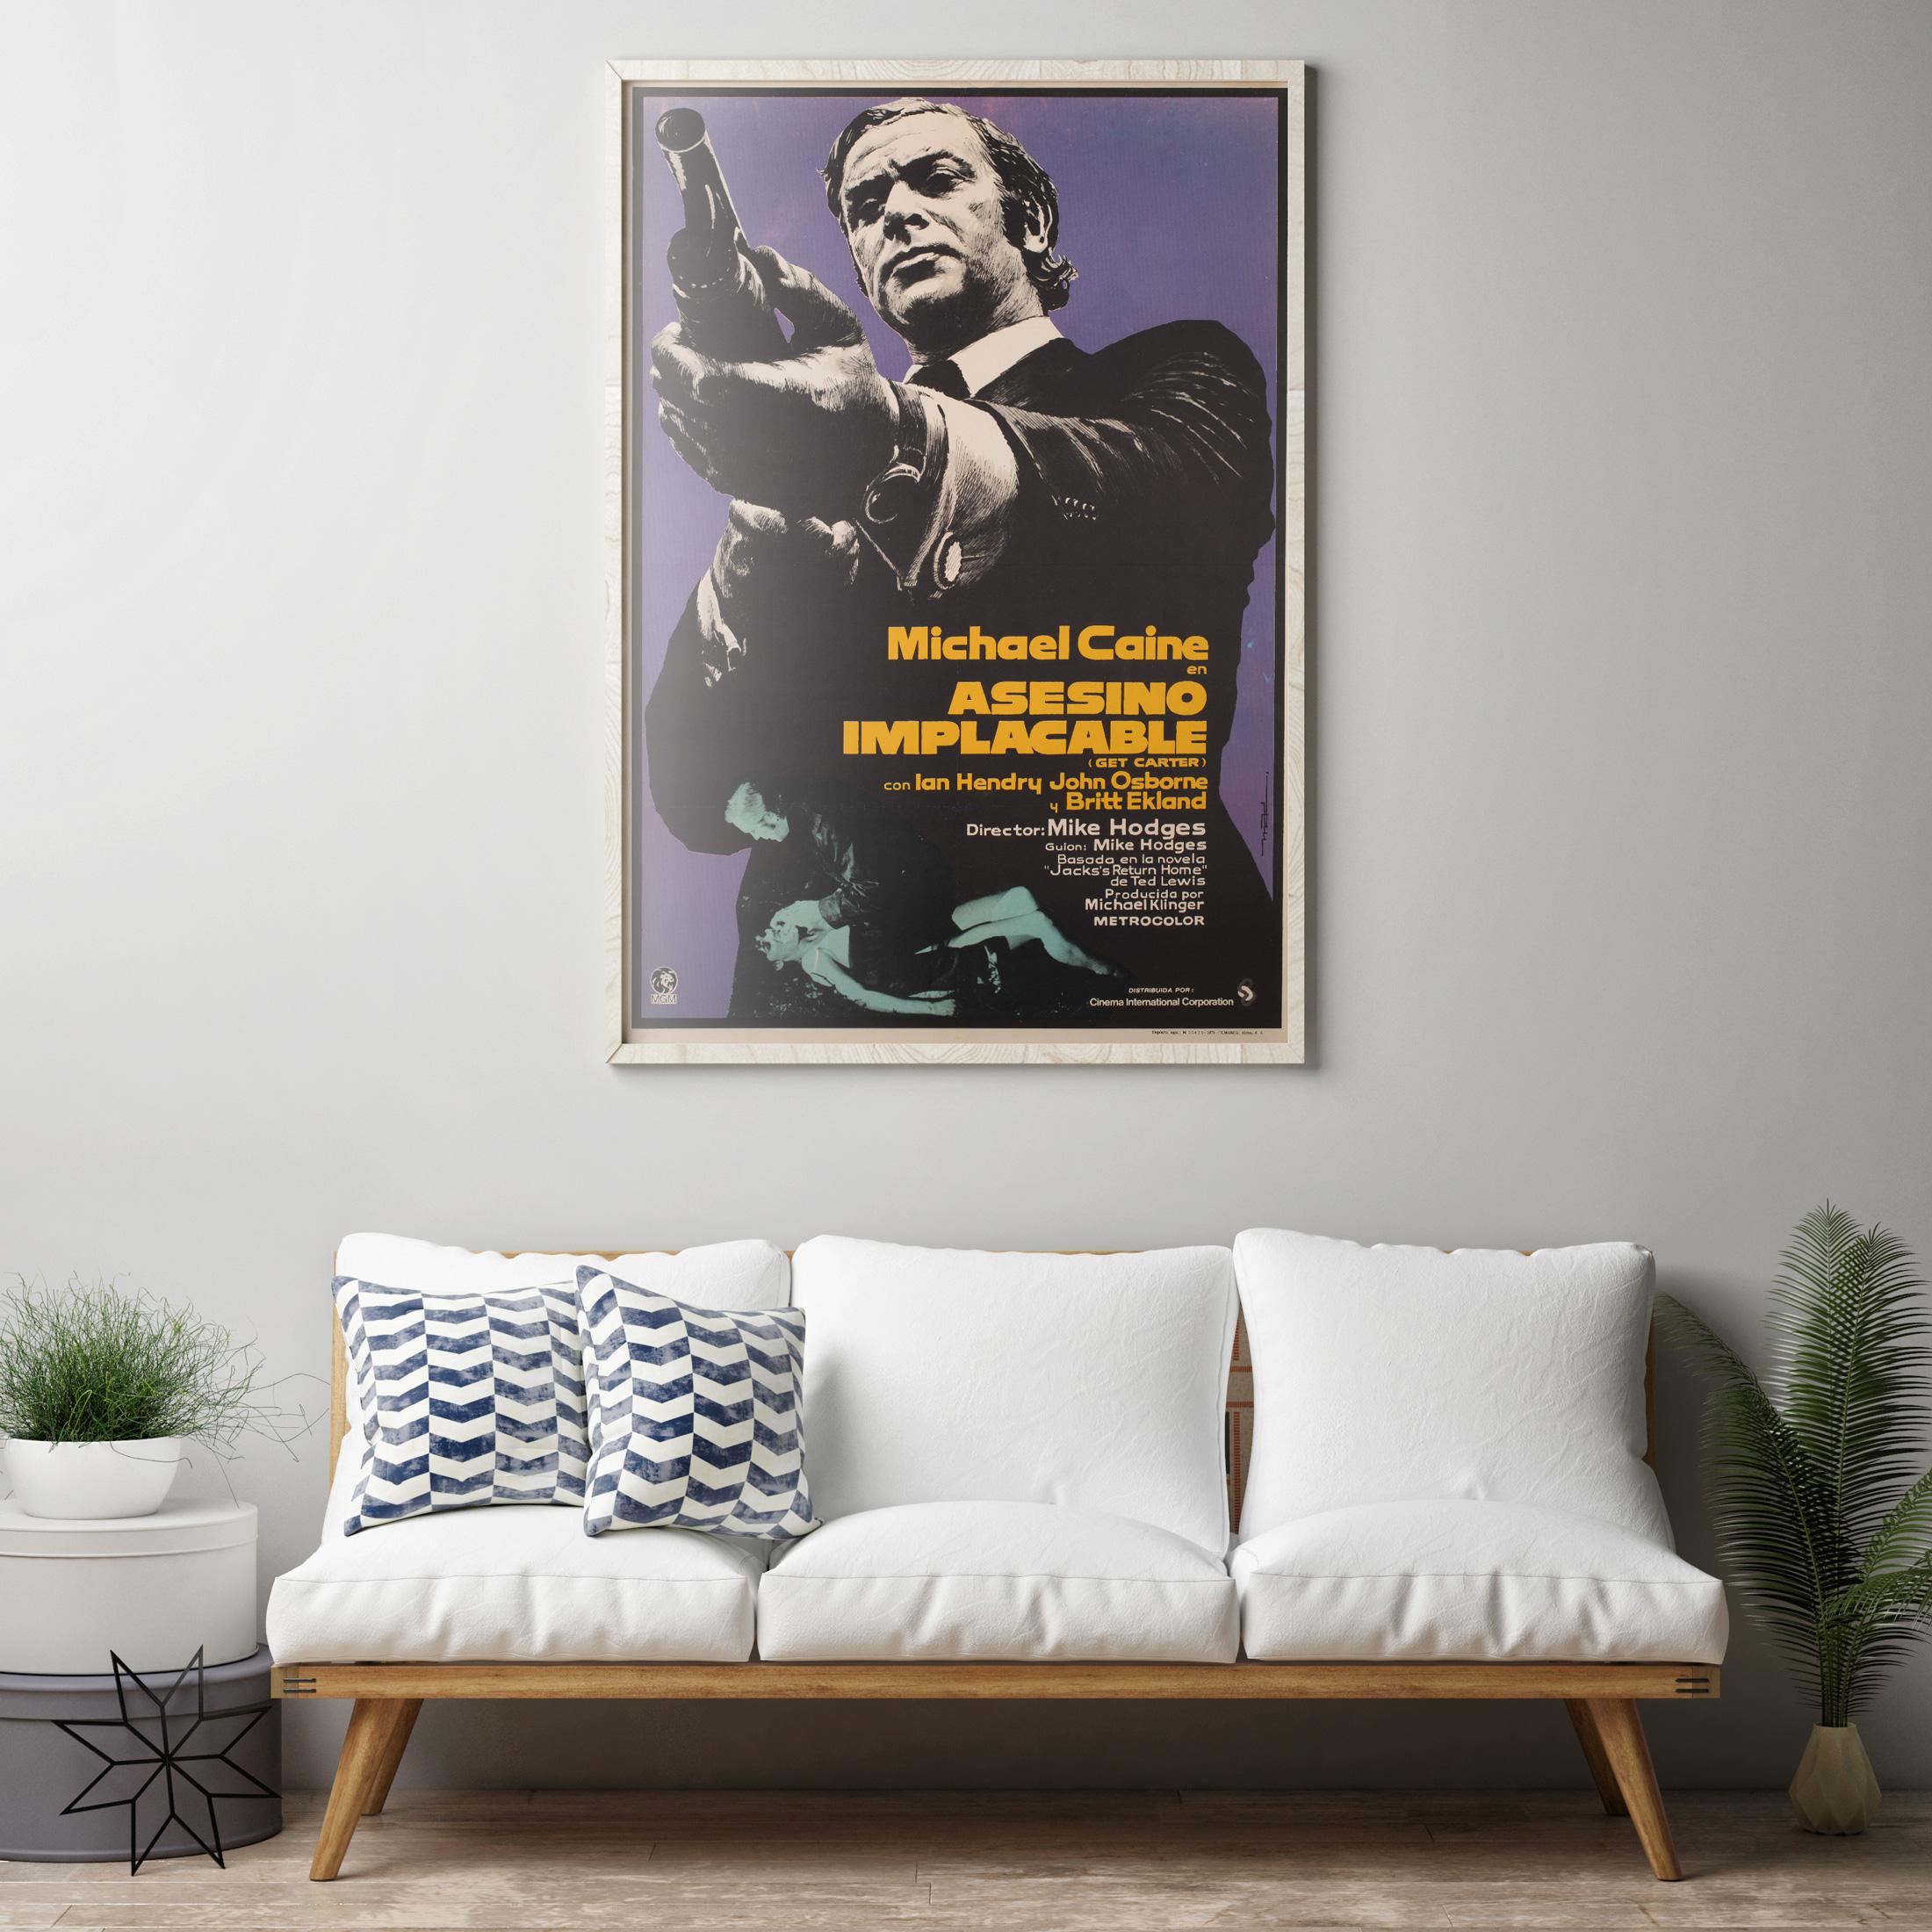 The Spanish 1 Sheet features the striking artwork by Mac of the fiercely dominating character of Michael Caine in one of his best roles as Jack Carter in Get Carter. Undoubtedly one of the greatest gangster films ever made.

This original vintage